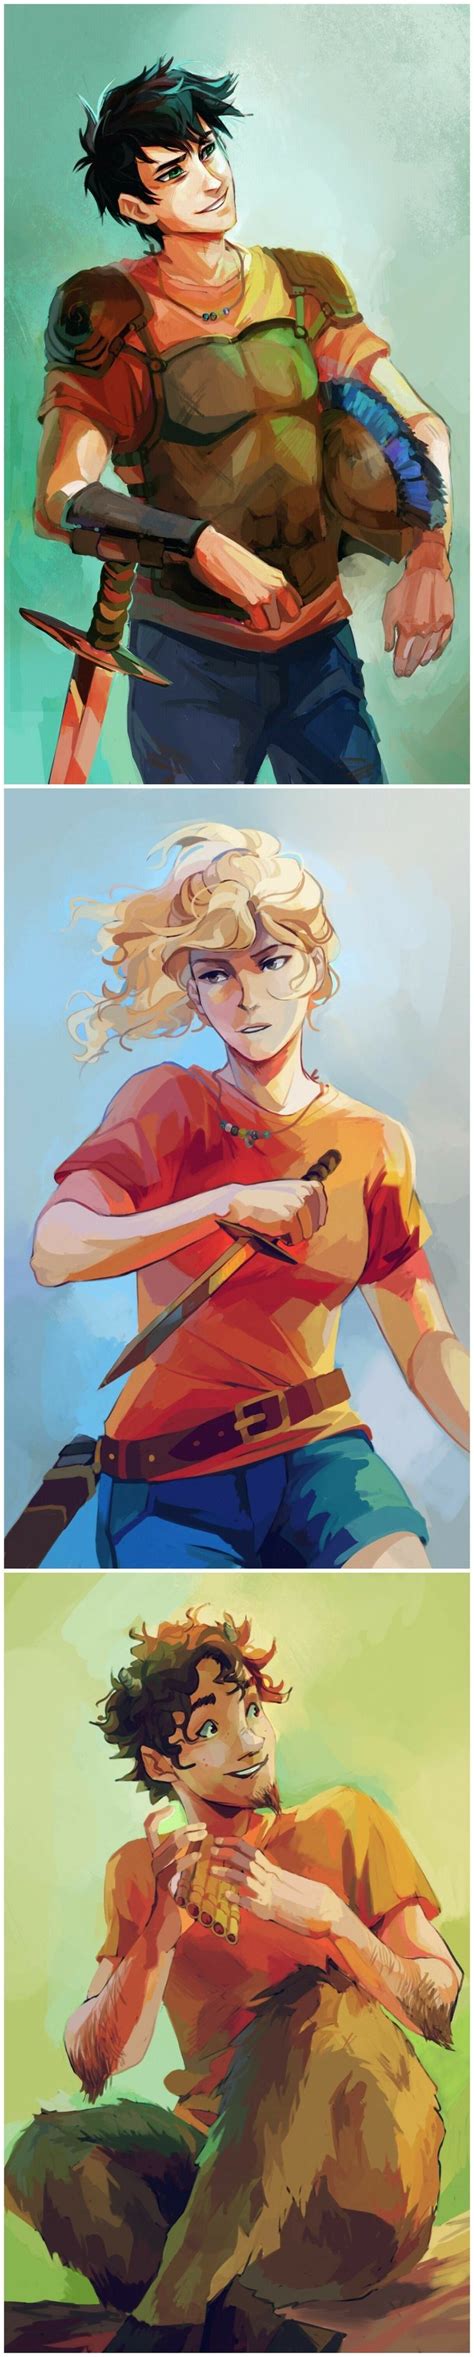 percy jackson annabeth chase and grover underwood i love this fan art p e r c y j a c k